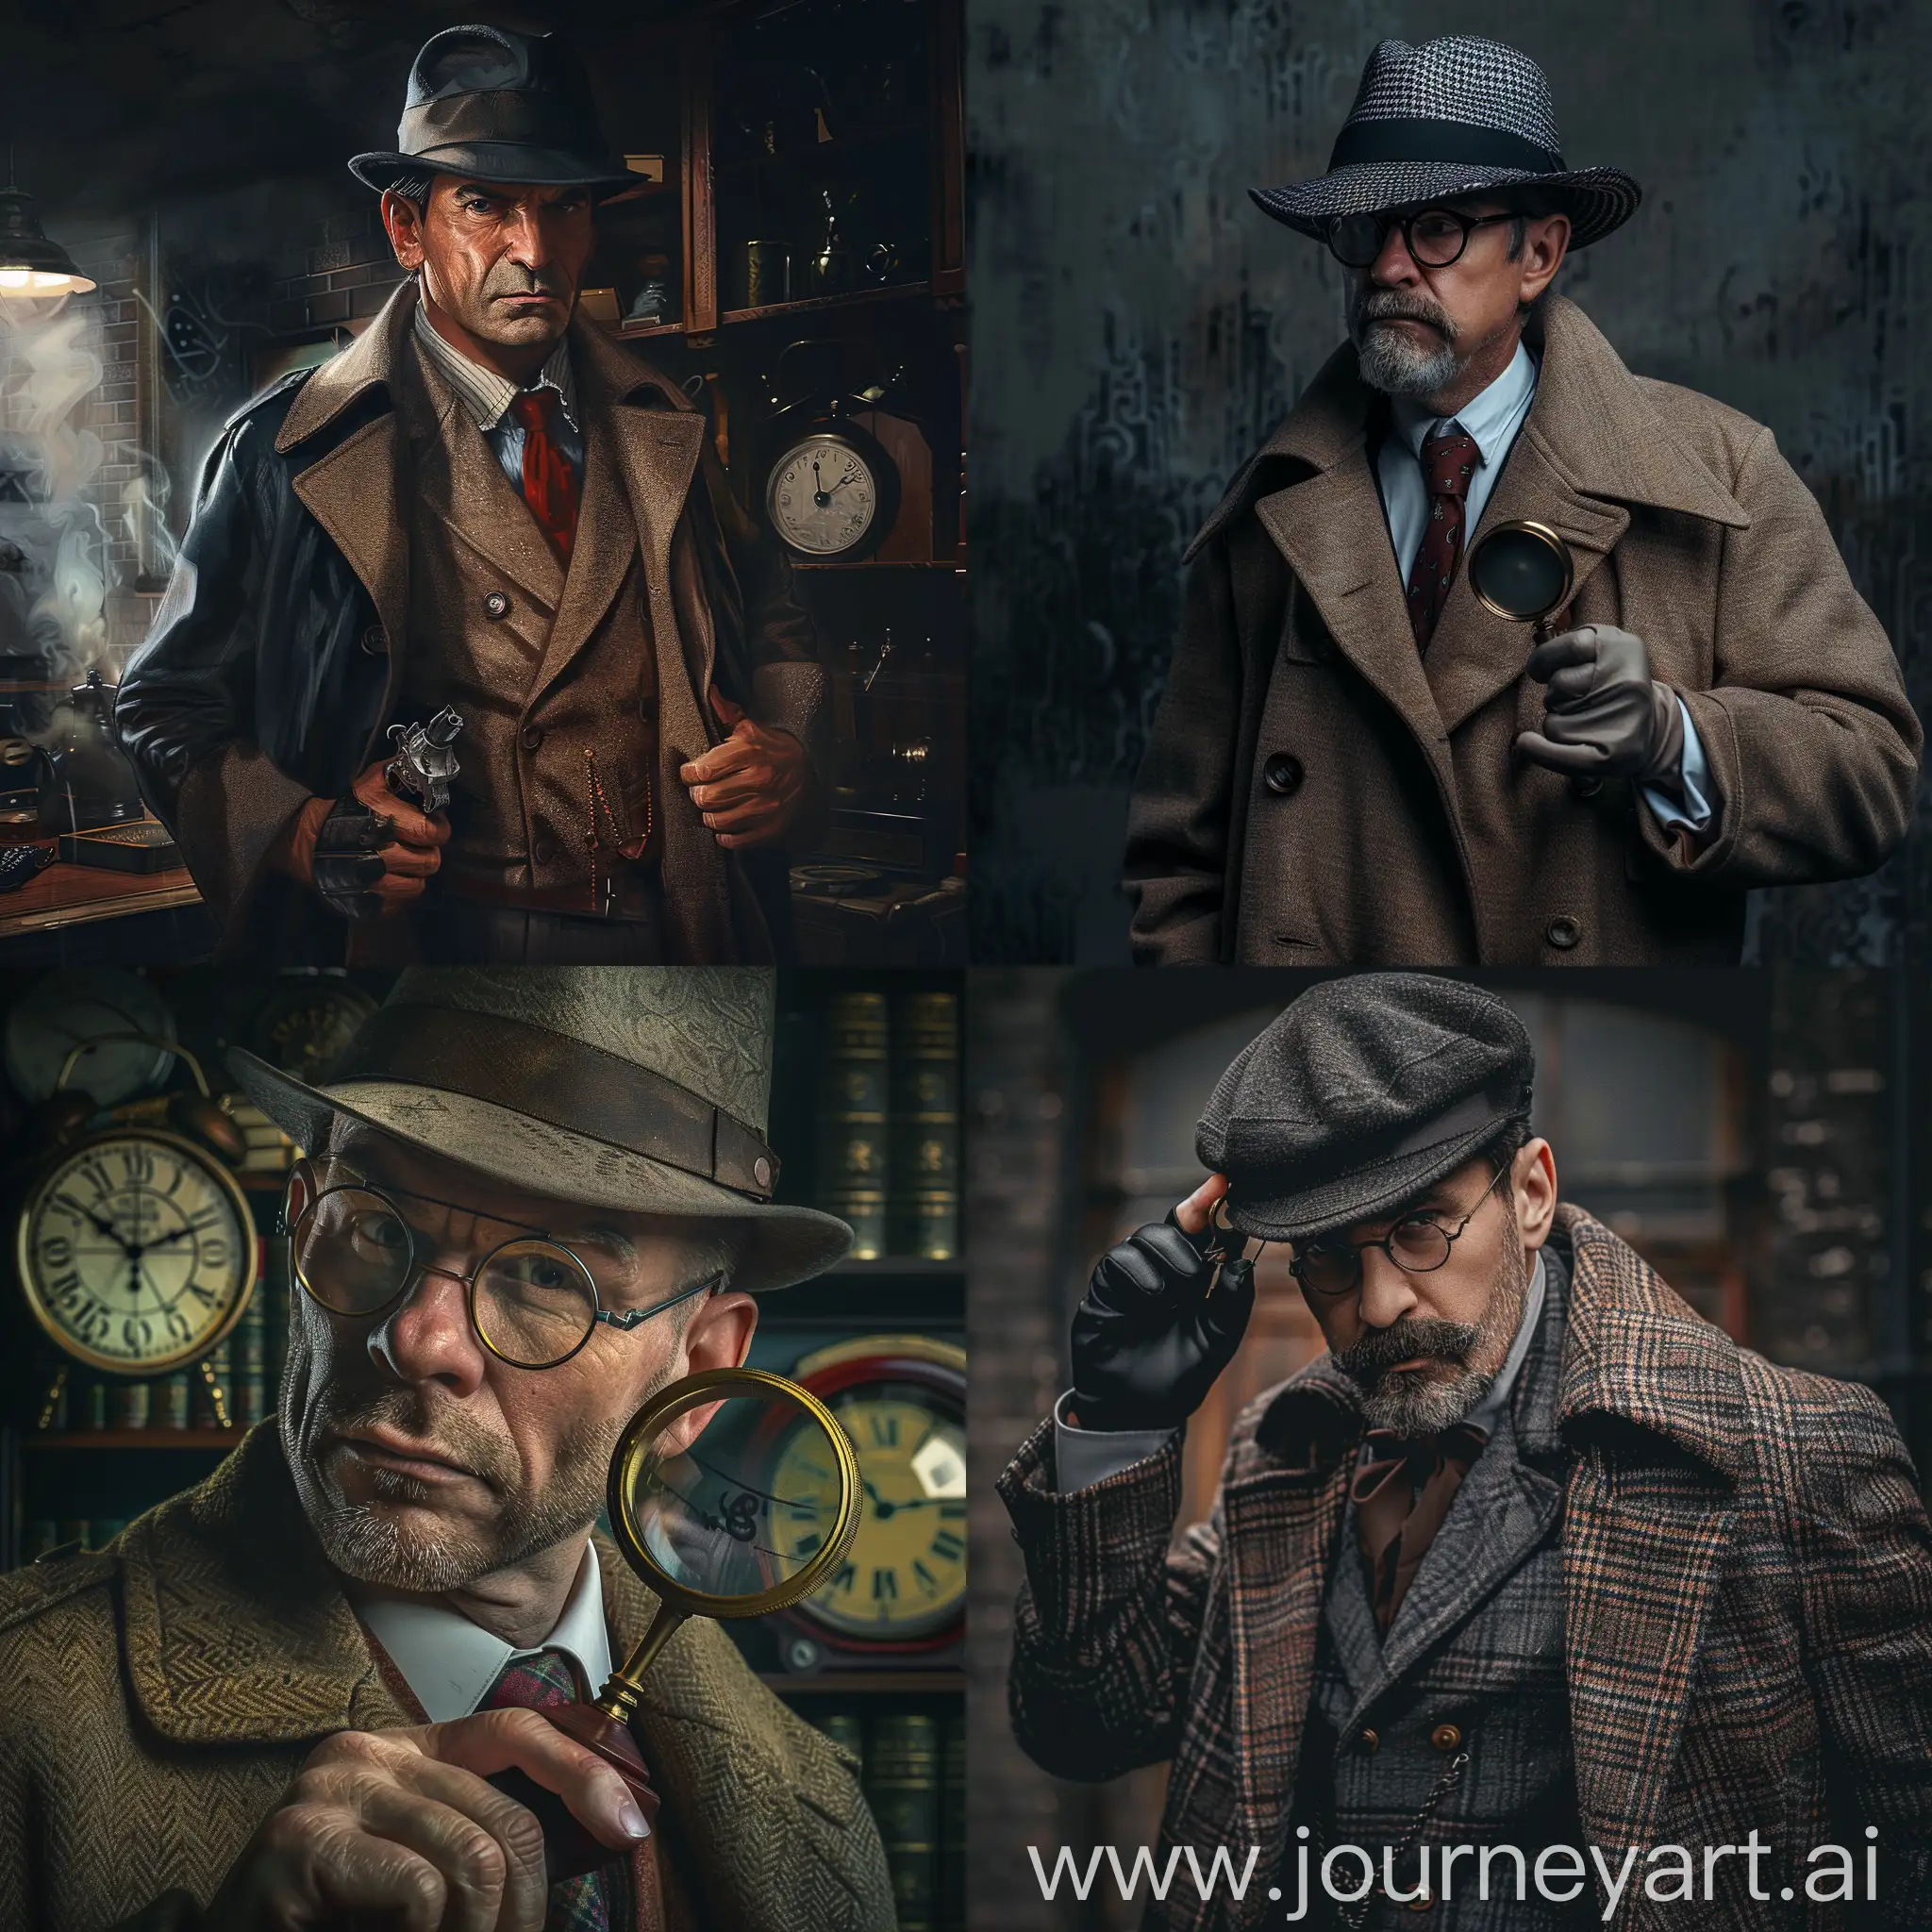 create an image of a detective